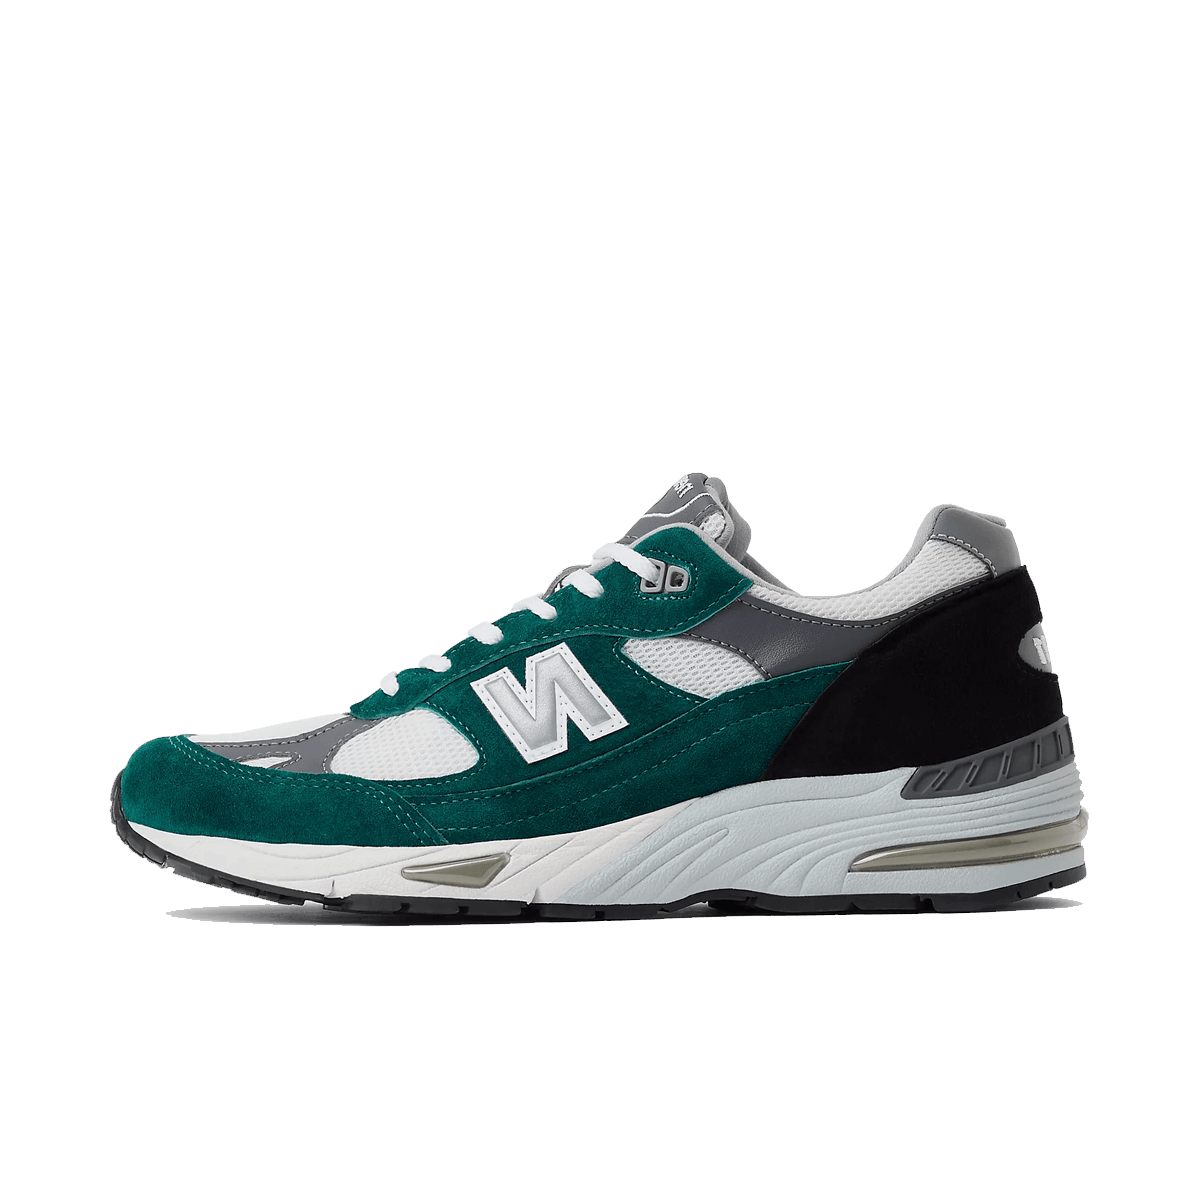 New Balance 991v1 'Pacific' - Made in UK M991 TLK